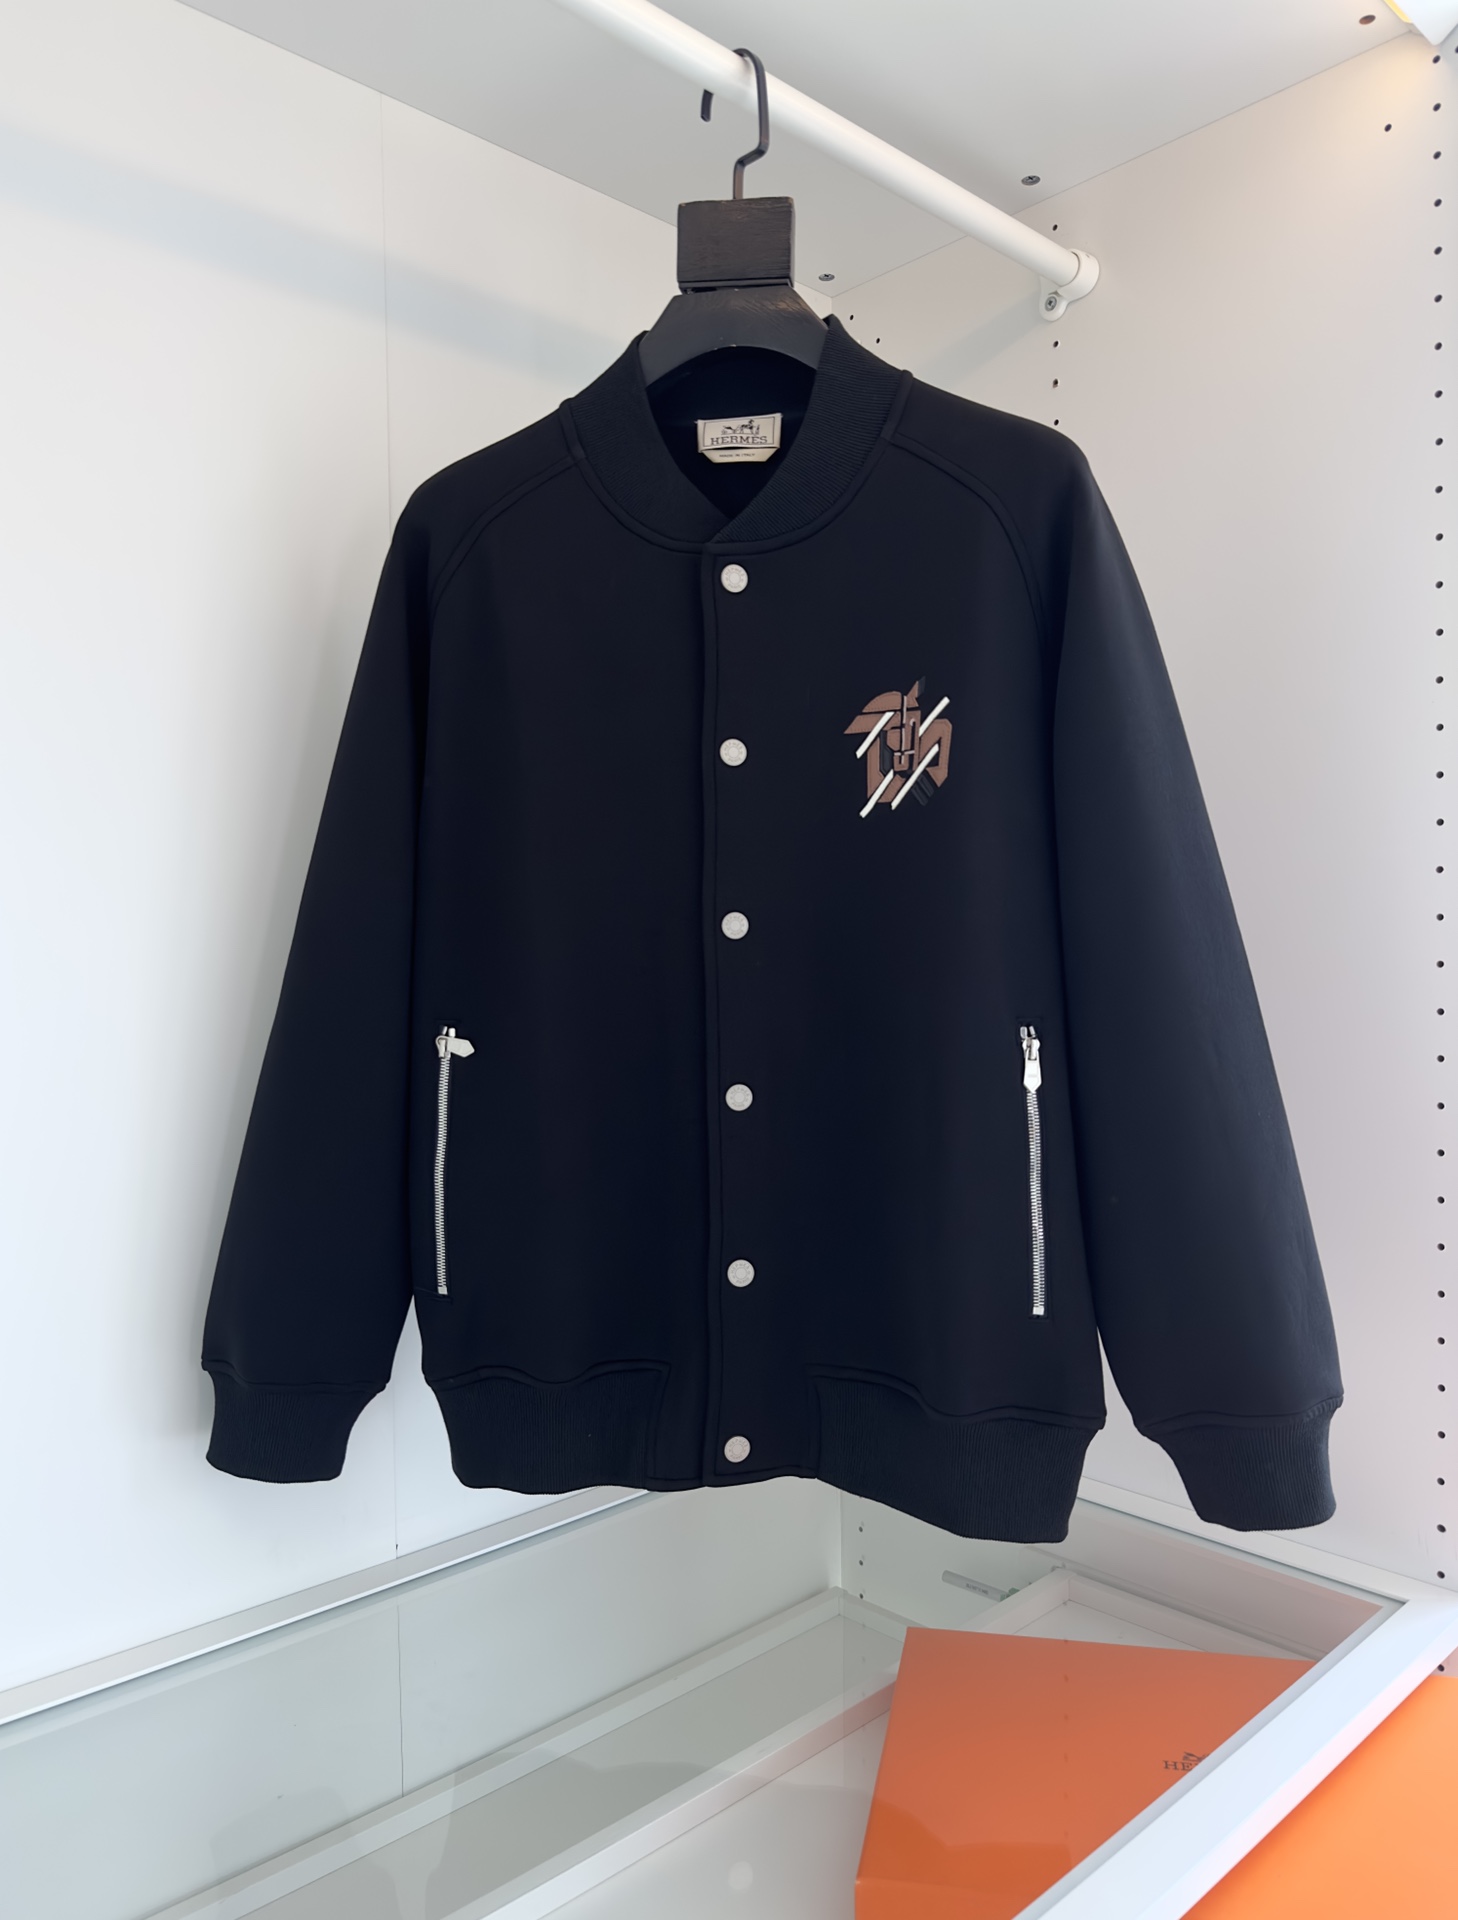 Hermes AAAA
 Clothing Coats & Jackets Brand Designer Replica
 Black Blue Dark Embroidery Cotton Fashion Casual